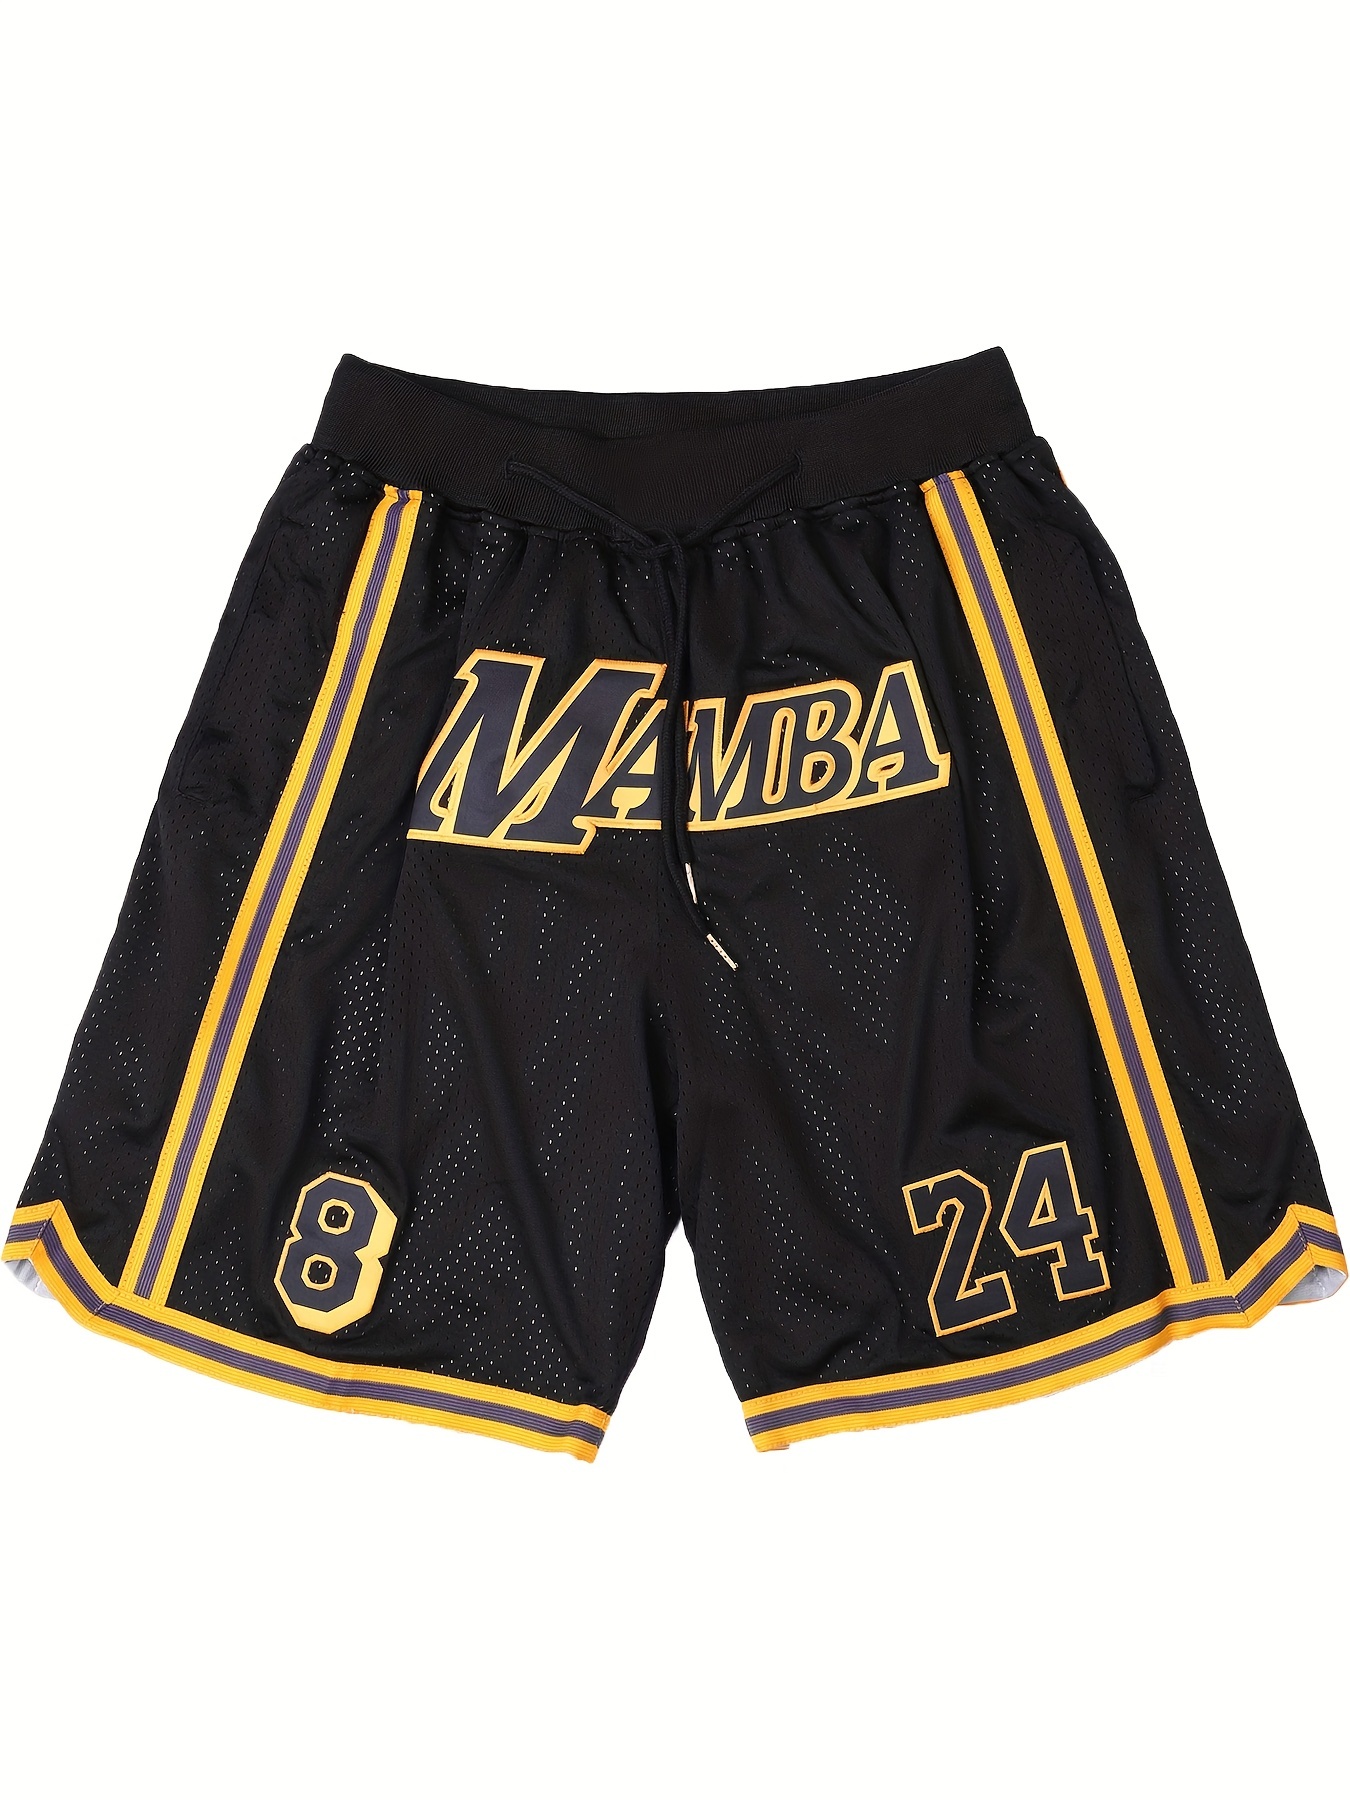 Men's Casual Letter Print Basketball Shorts, Slightly Stretch Quick-drying Mesh Drawstring Sports Shorts for Summer,Breathable, Quick Dry,Temu